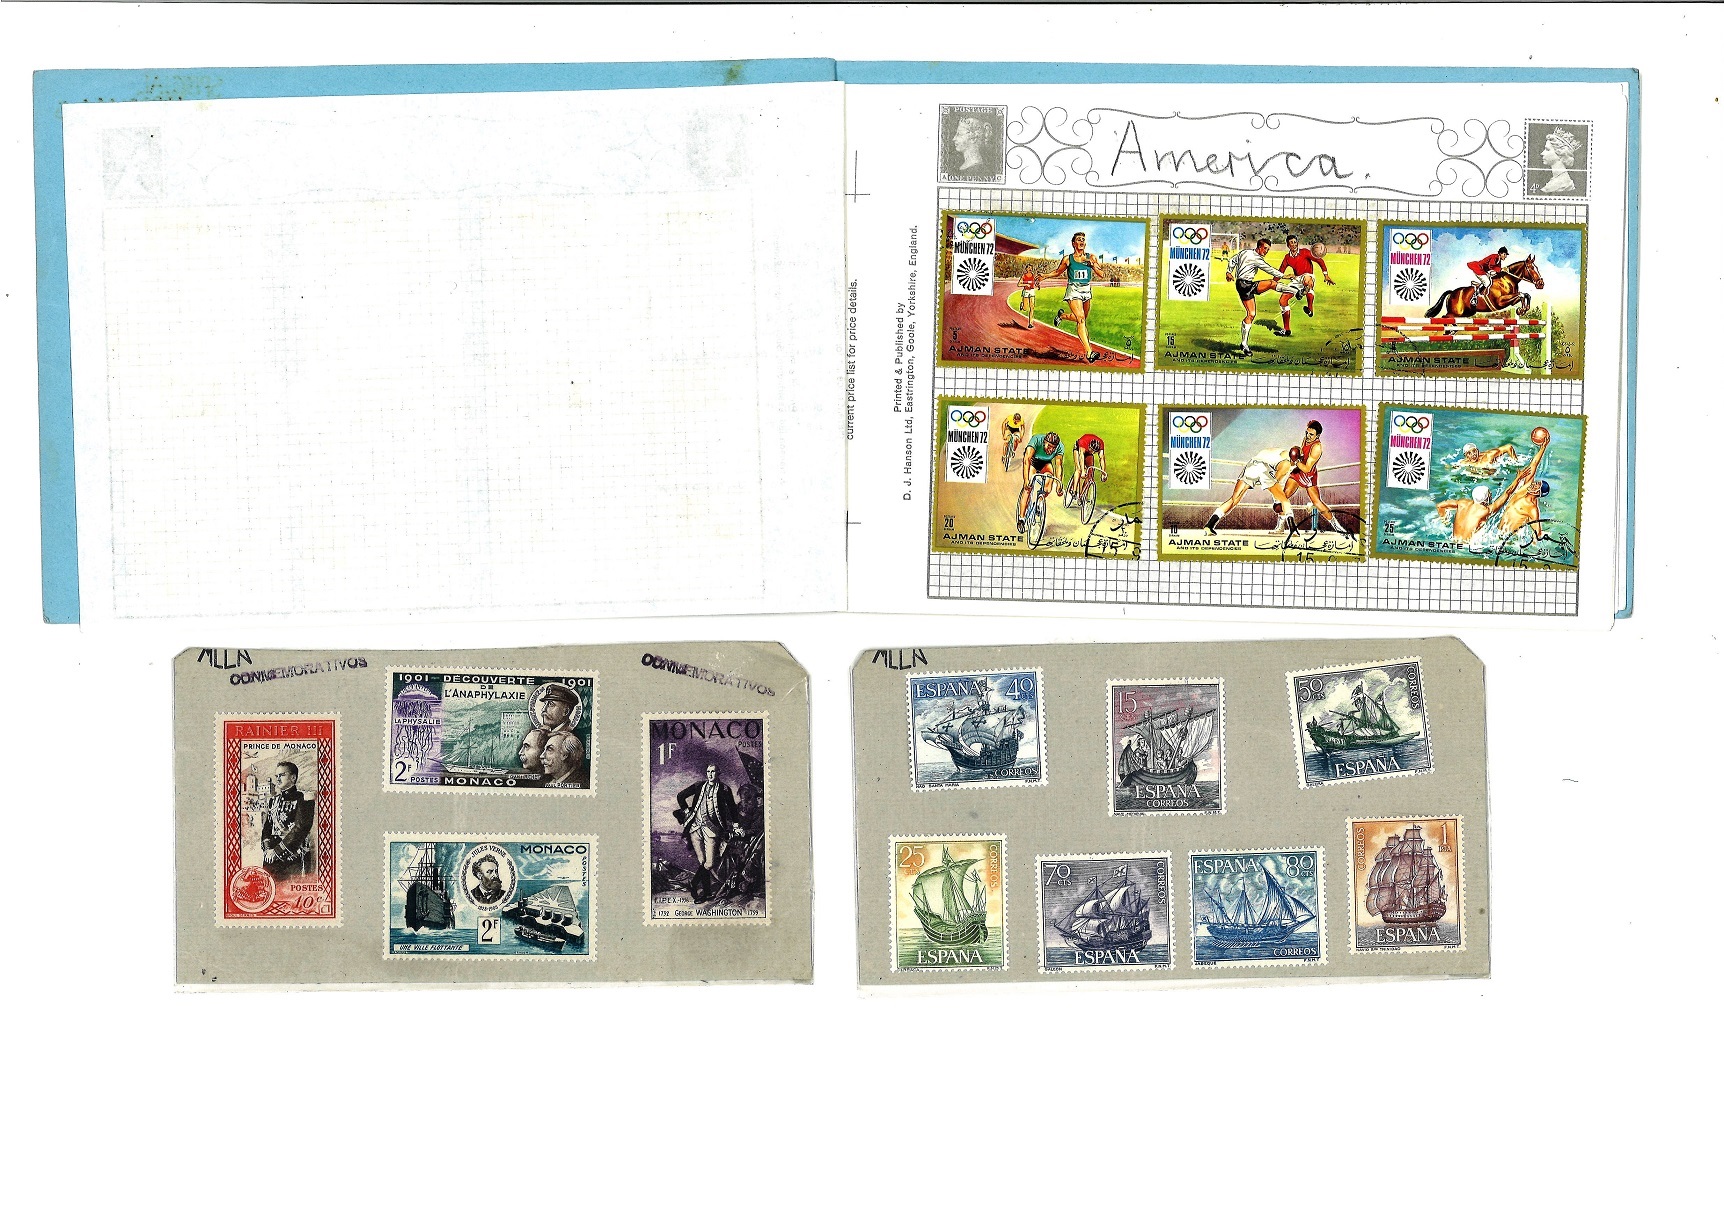 Stamp collection. Includes 2 GB stamp booklets incomplete. 3 = 18x 1 1 2d, 6x1d, 6x 1 2d, 10p, 2x1